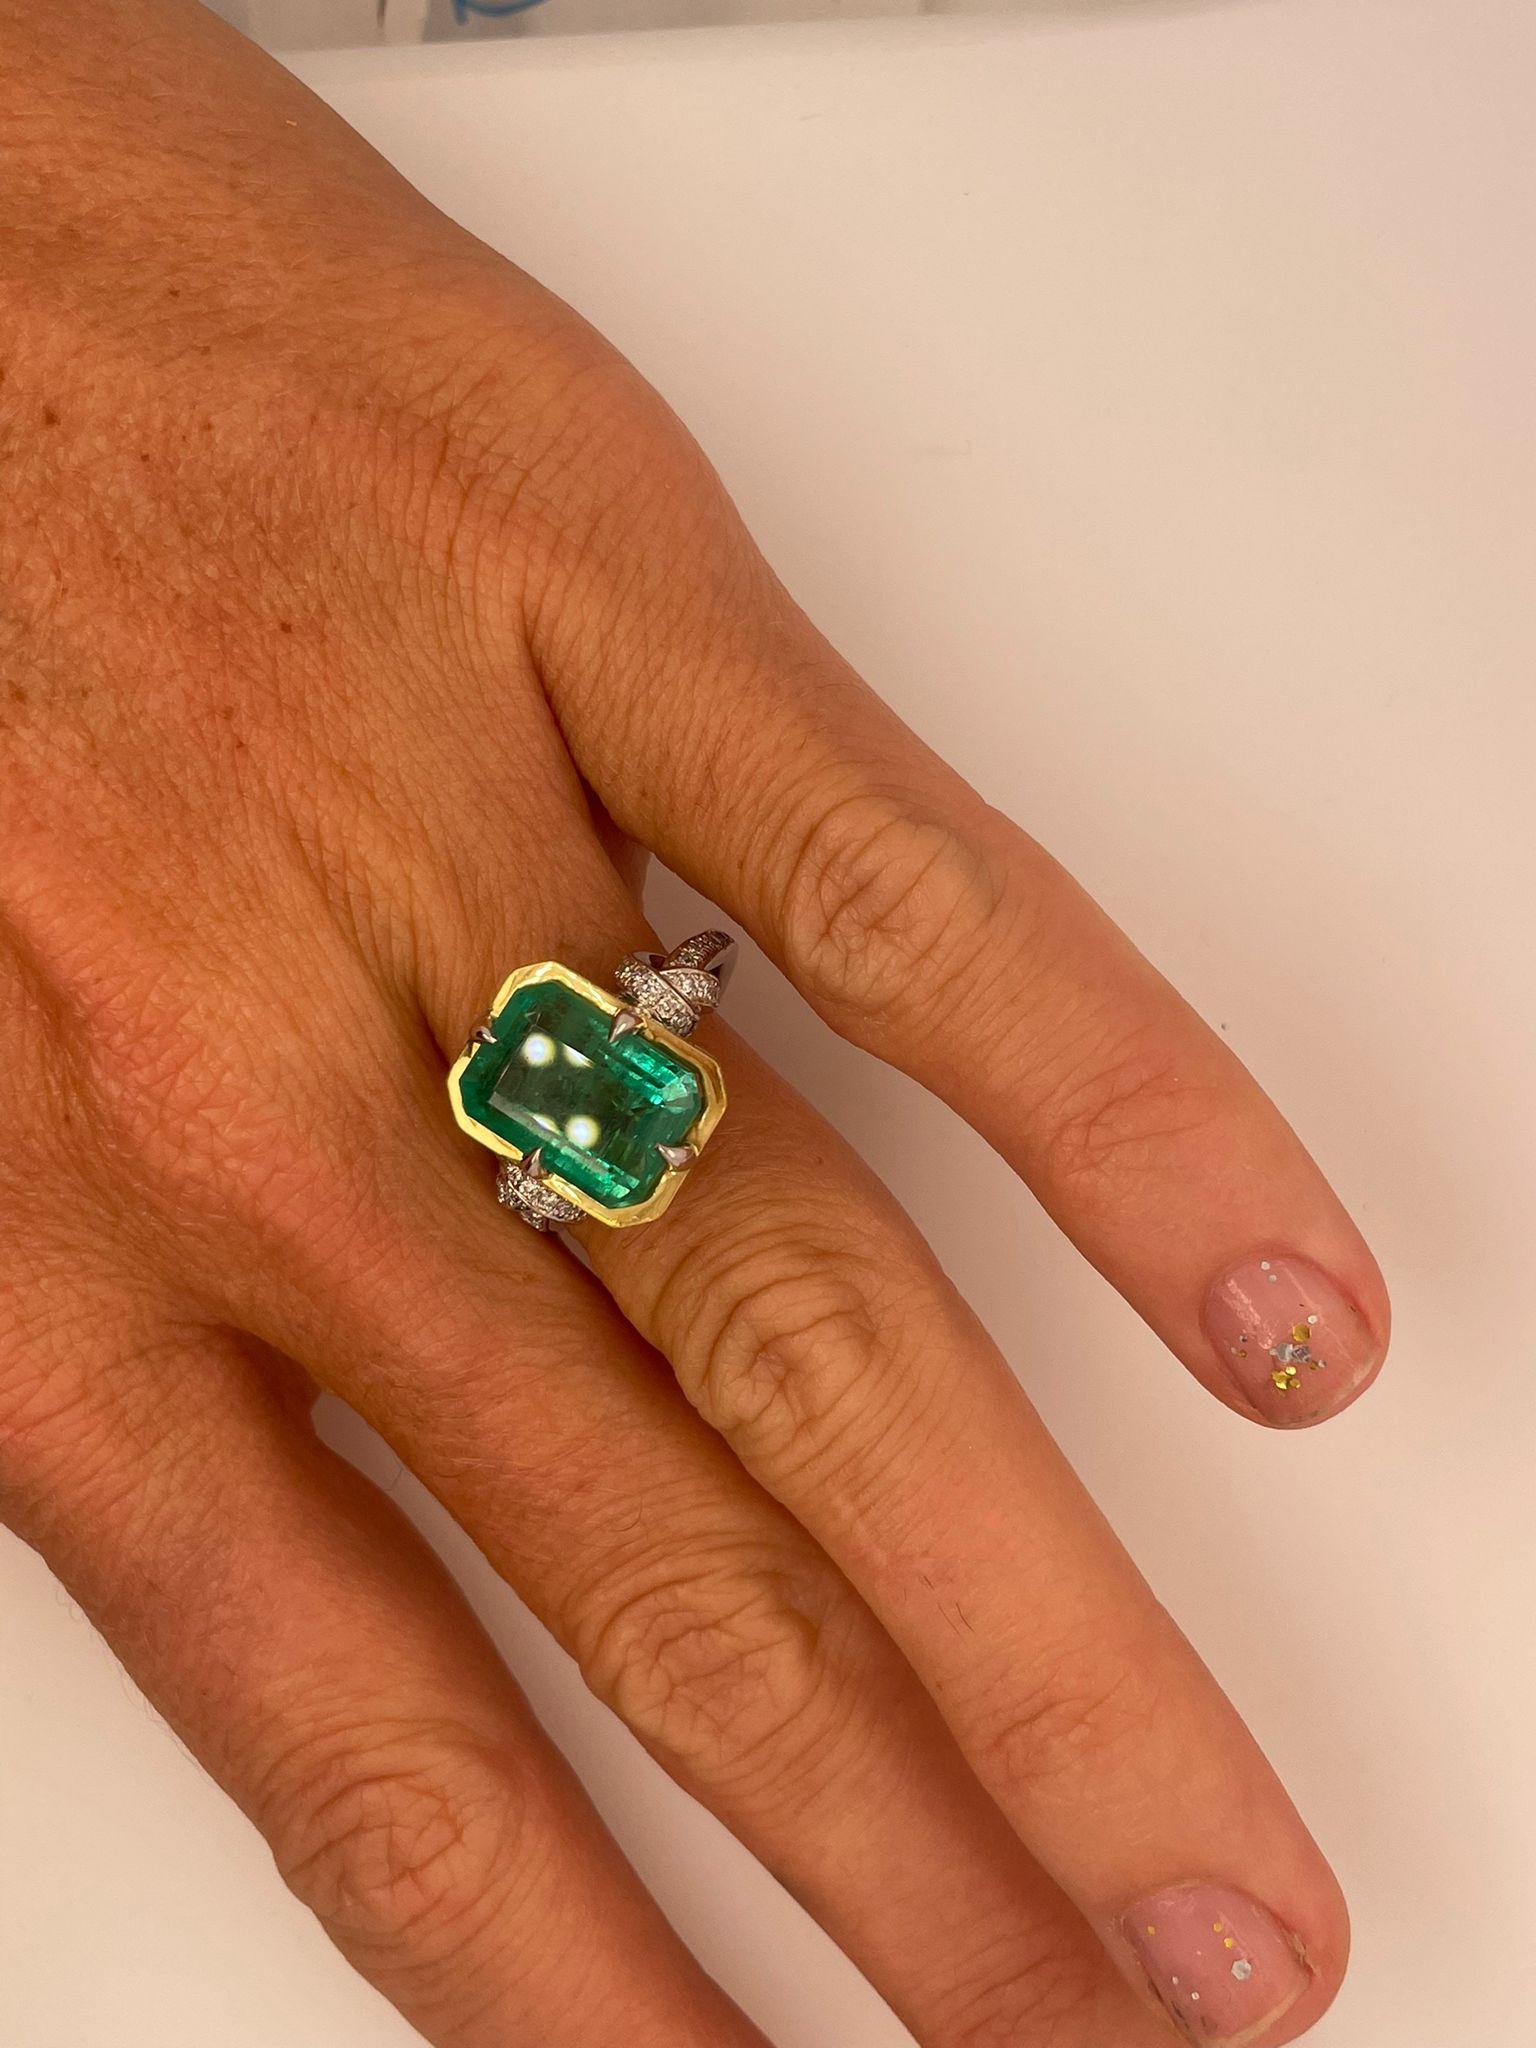 5.79 Carat Zambian Emerald in Forget Me Knot Style Ring with Diamonds 5